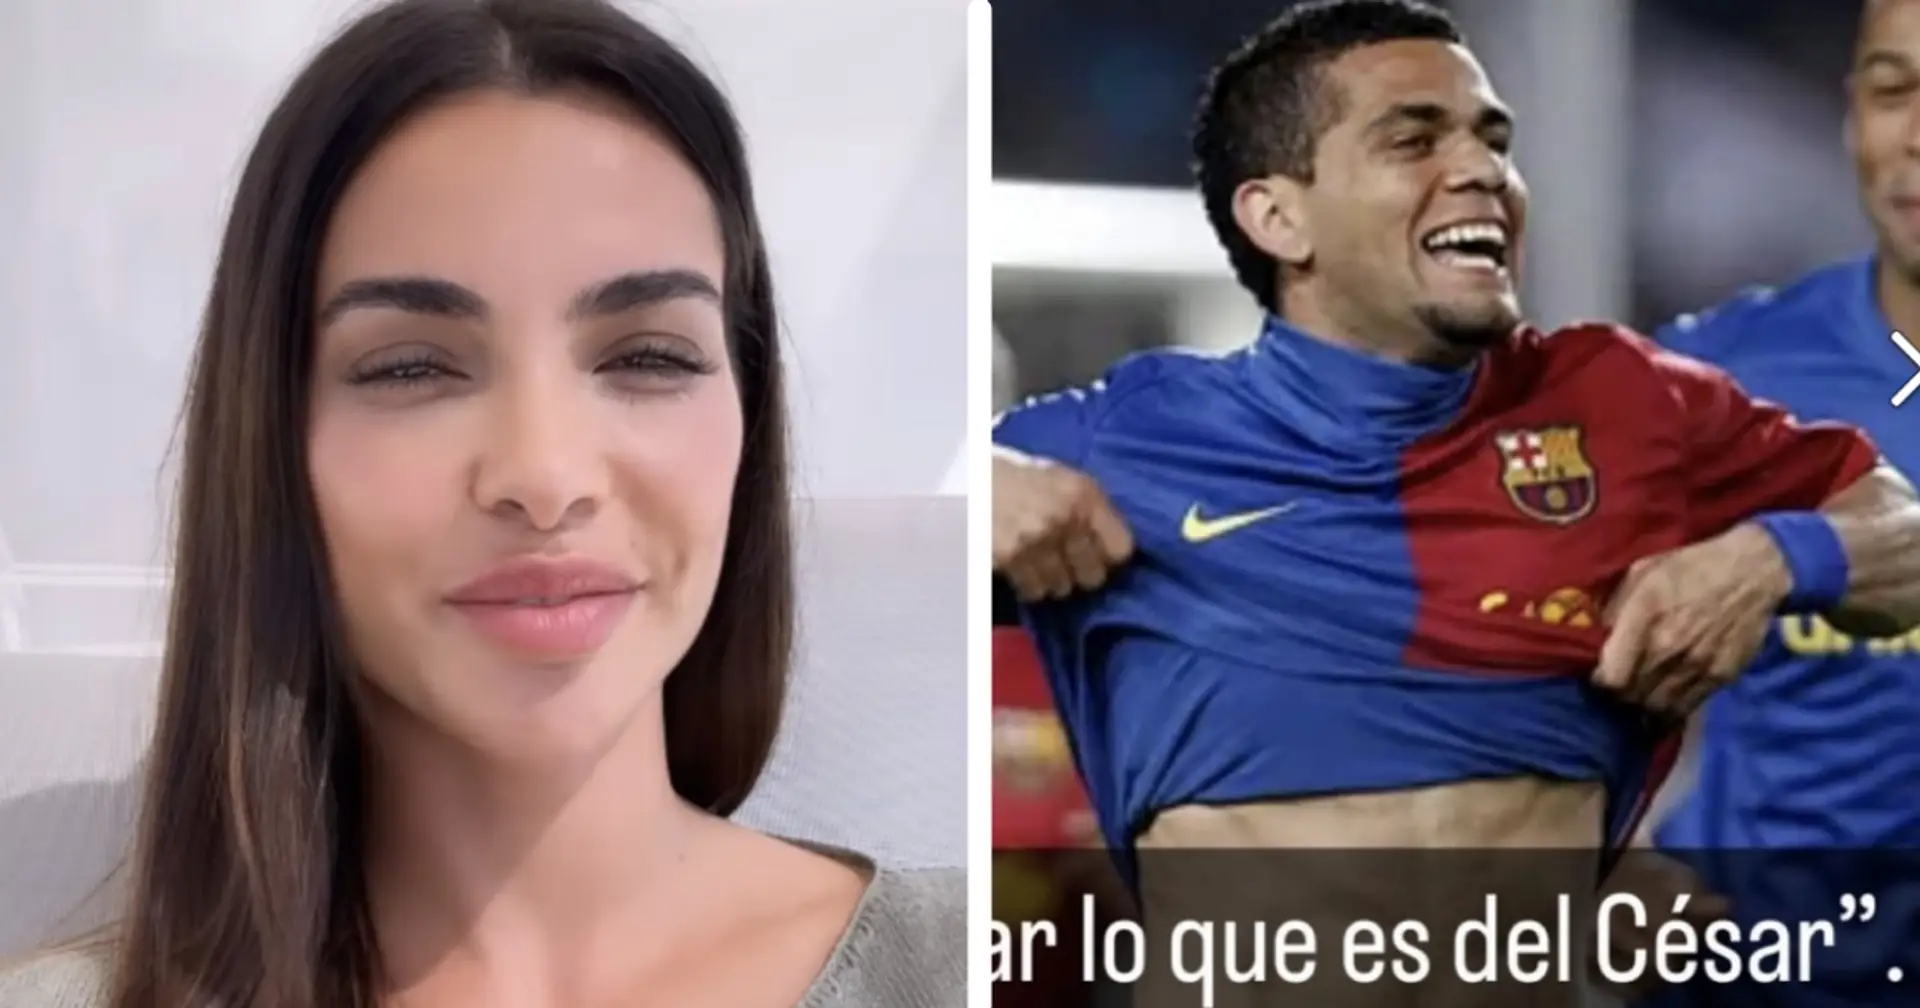 Dani Alves' ex-wife reacts to Barca restoring Brazilian's legend status with biblical quote